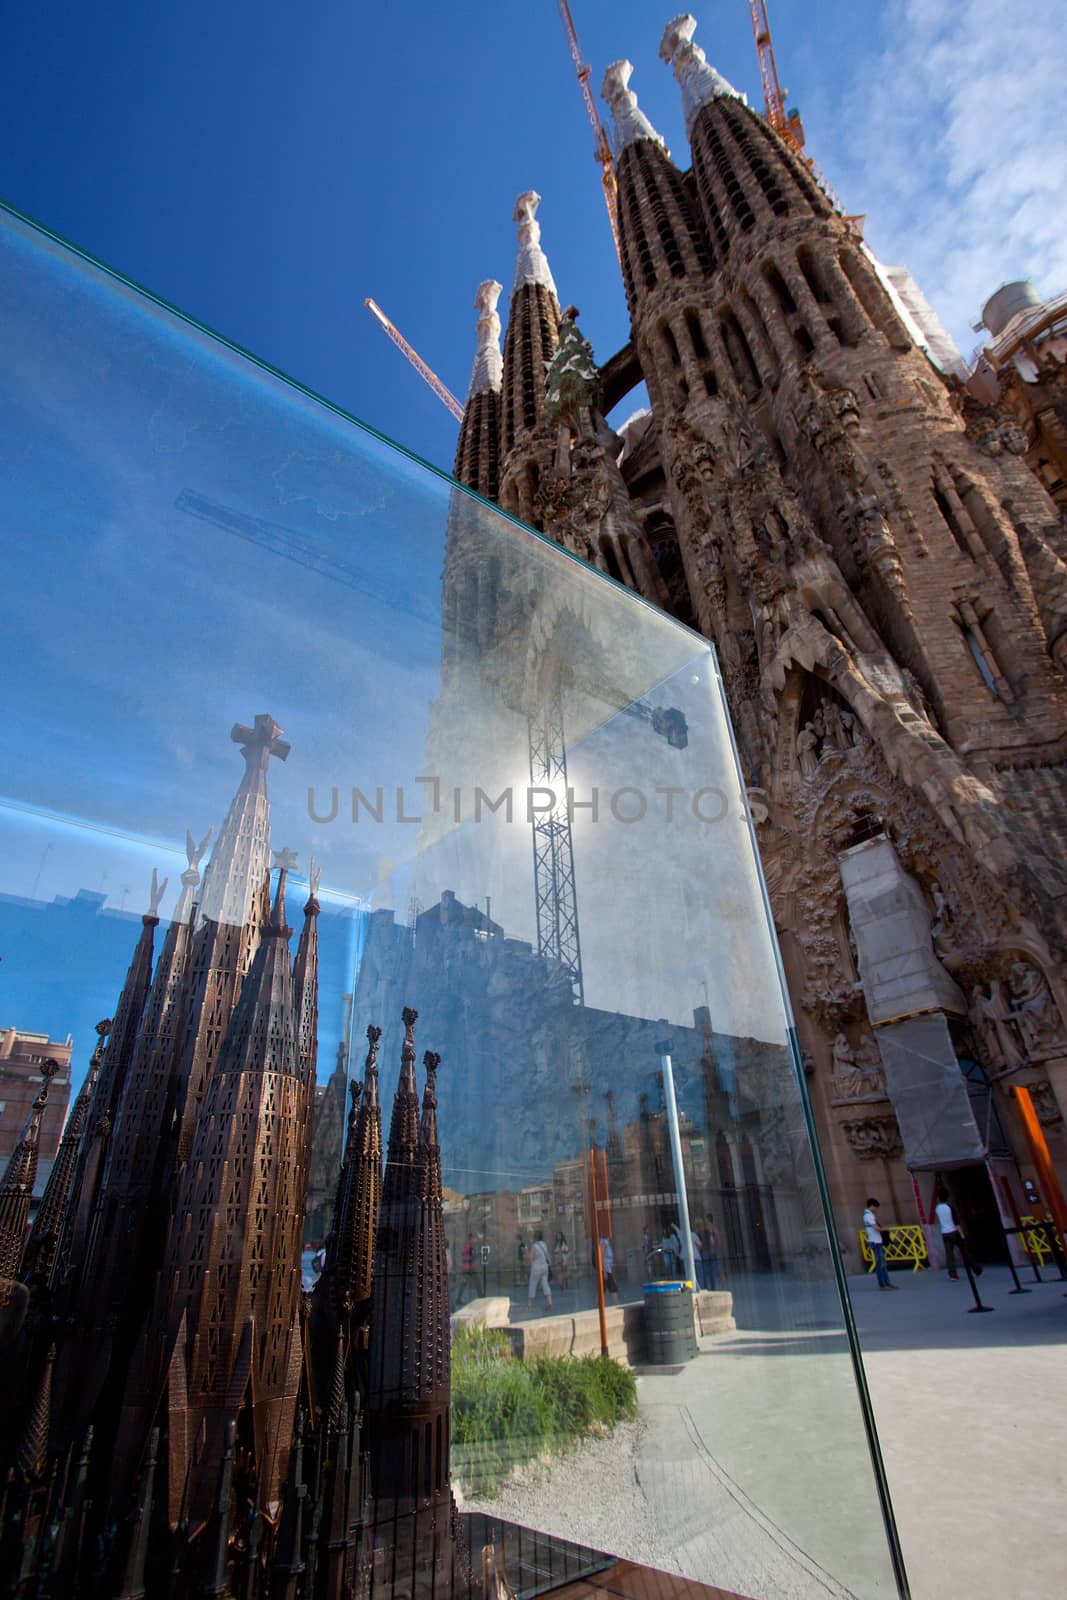 BARCELONA, SPAIN - JUNE 13: La Sagrada Familia – miniature of the impressive cathedral designed by Gaudi, which is being build since 19 March 1882 and is not finished yet JUNE 13, 2013 in Barcelona, Spain.  Editorial use only